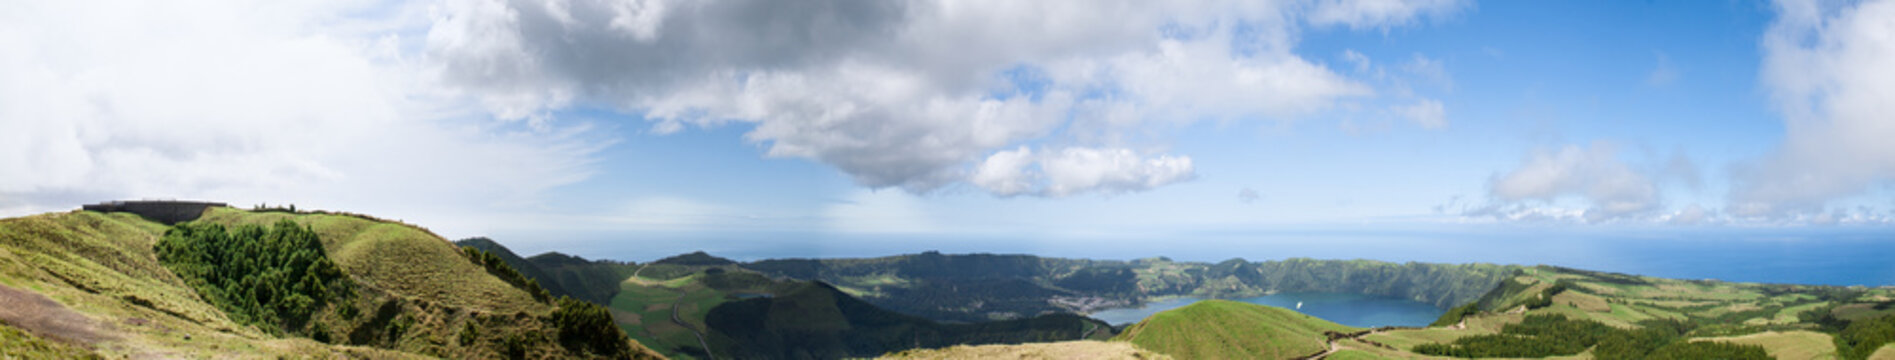 Panorama of Lagoa Verde with Ocean in Background, Sao Miguel, Azores, Portugal